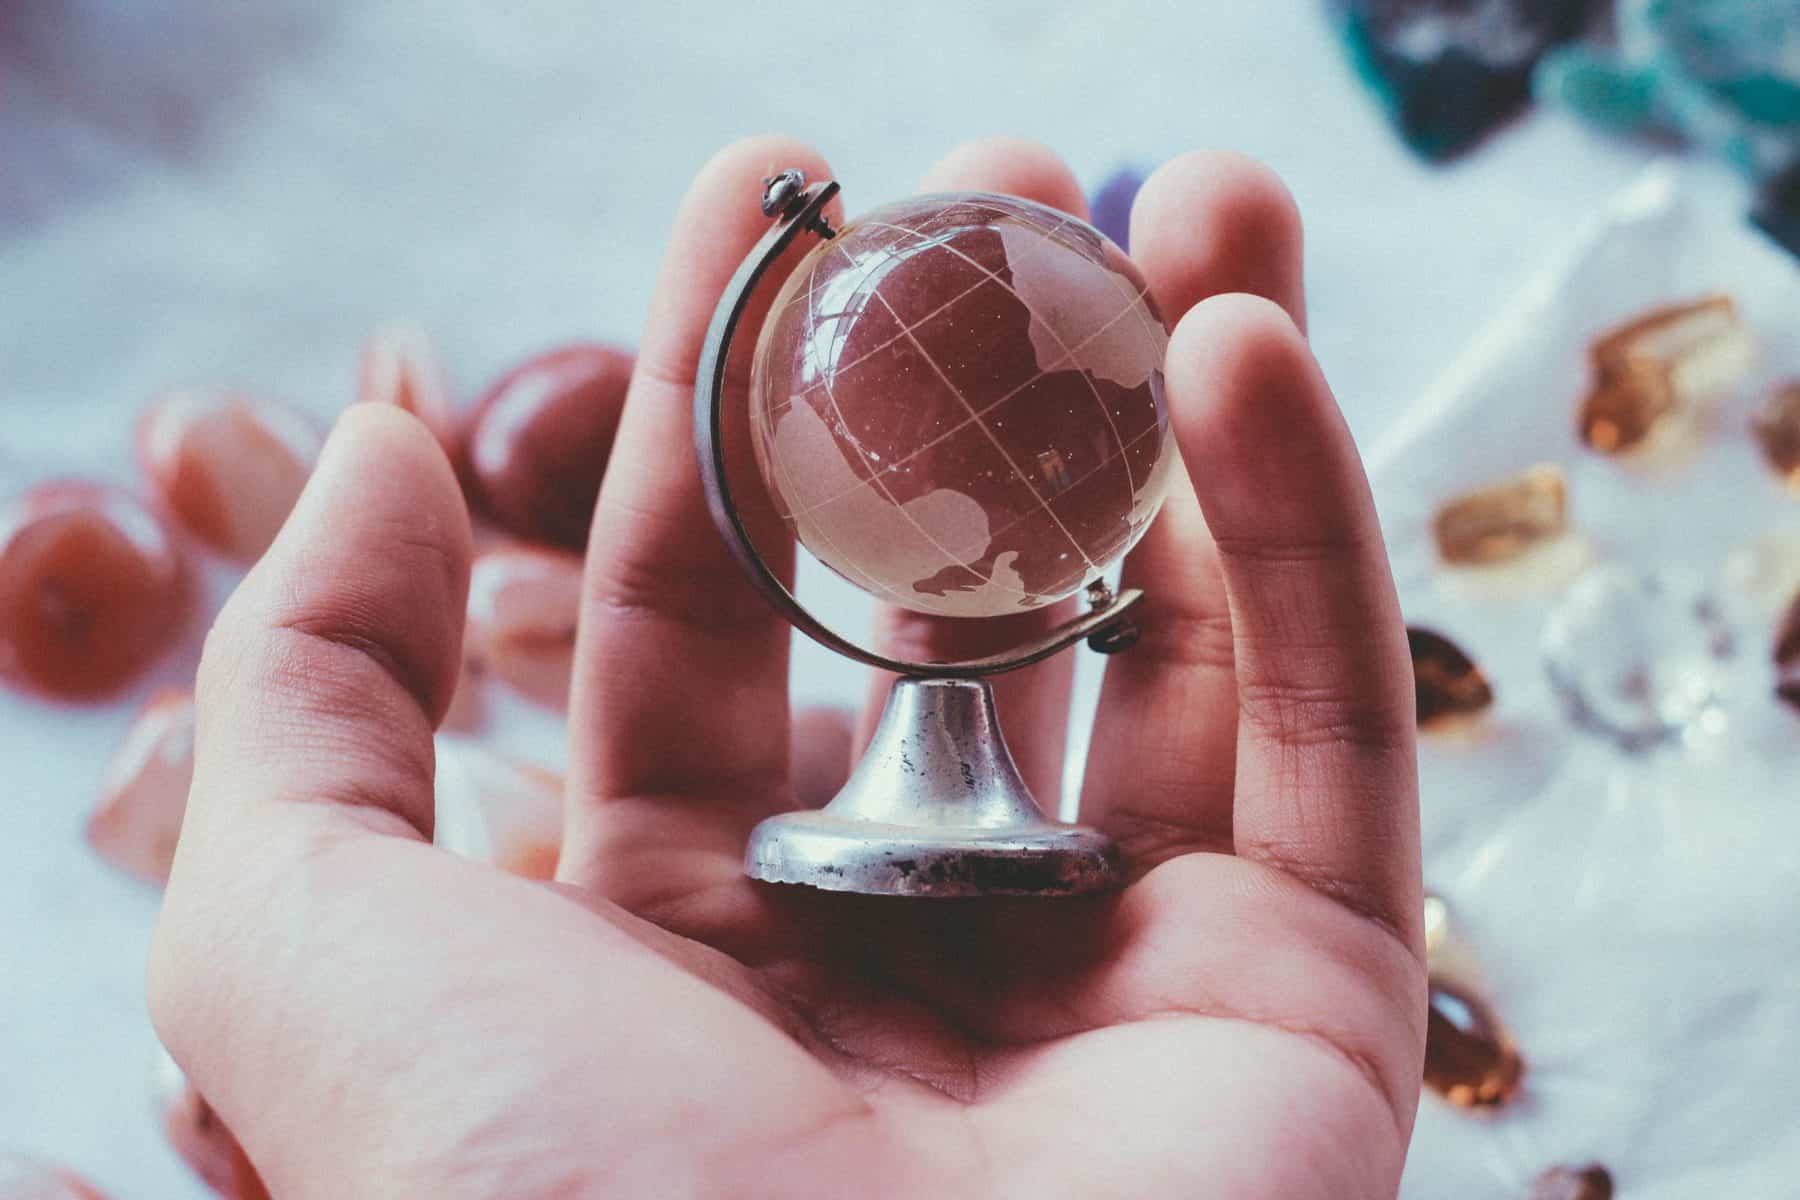 Close up of a hand holding a paperweight of a globe in their palm